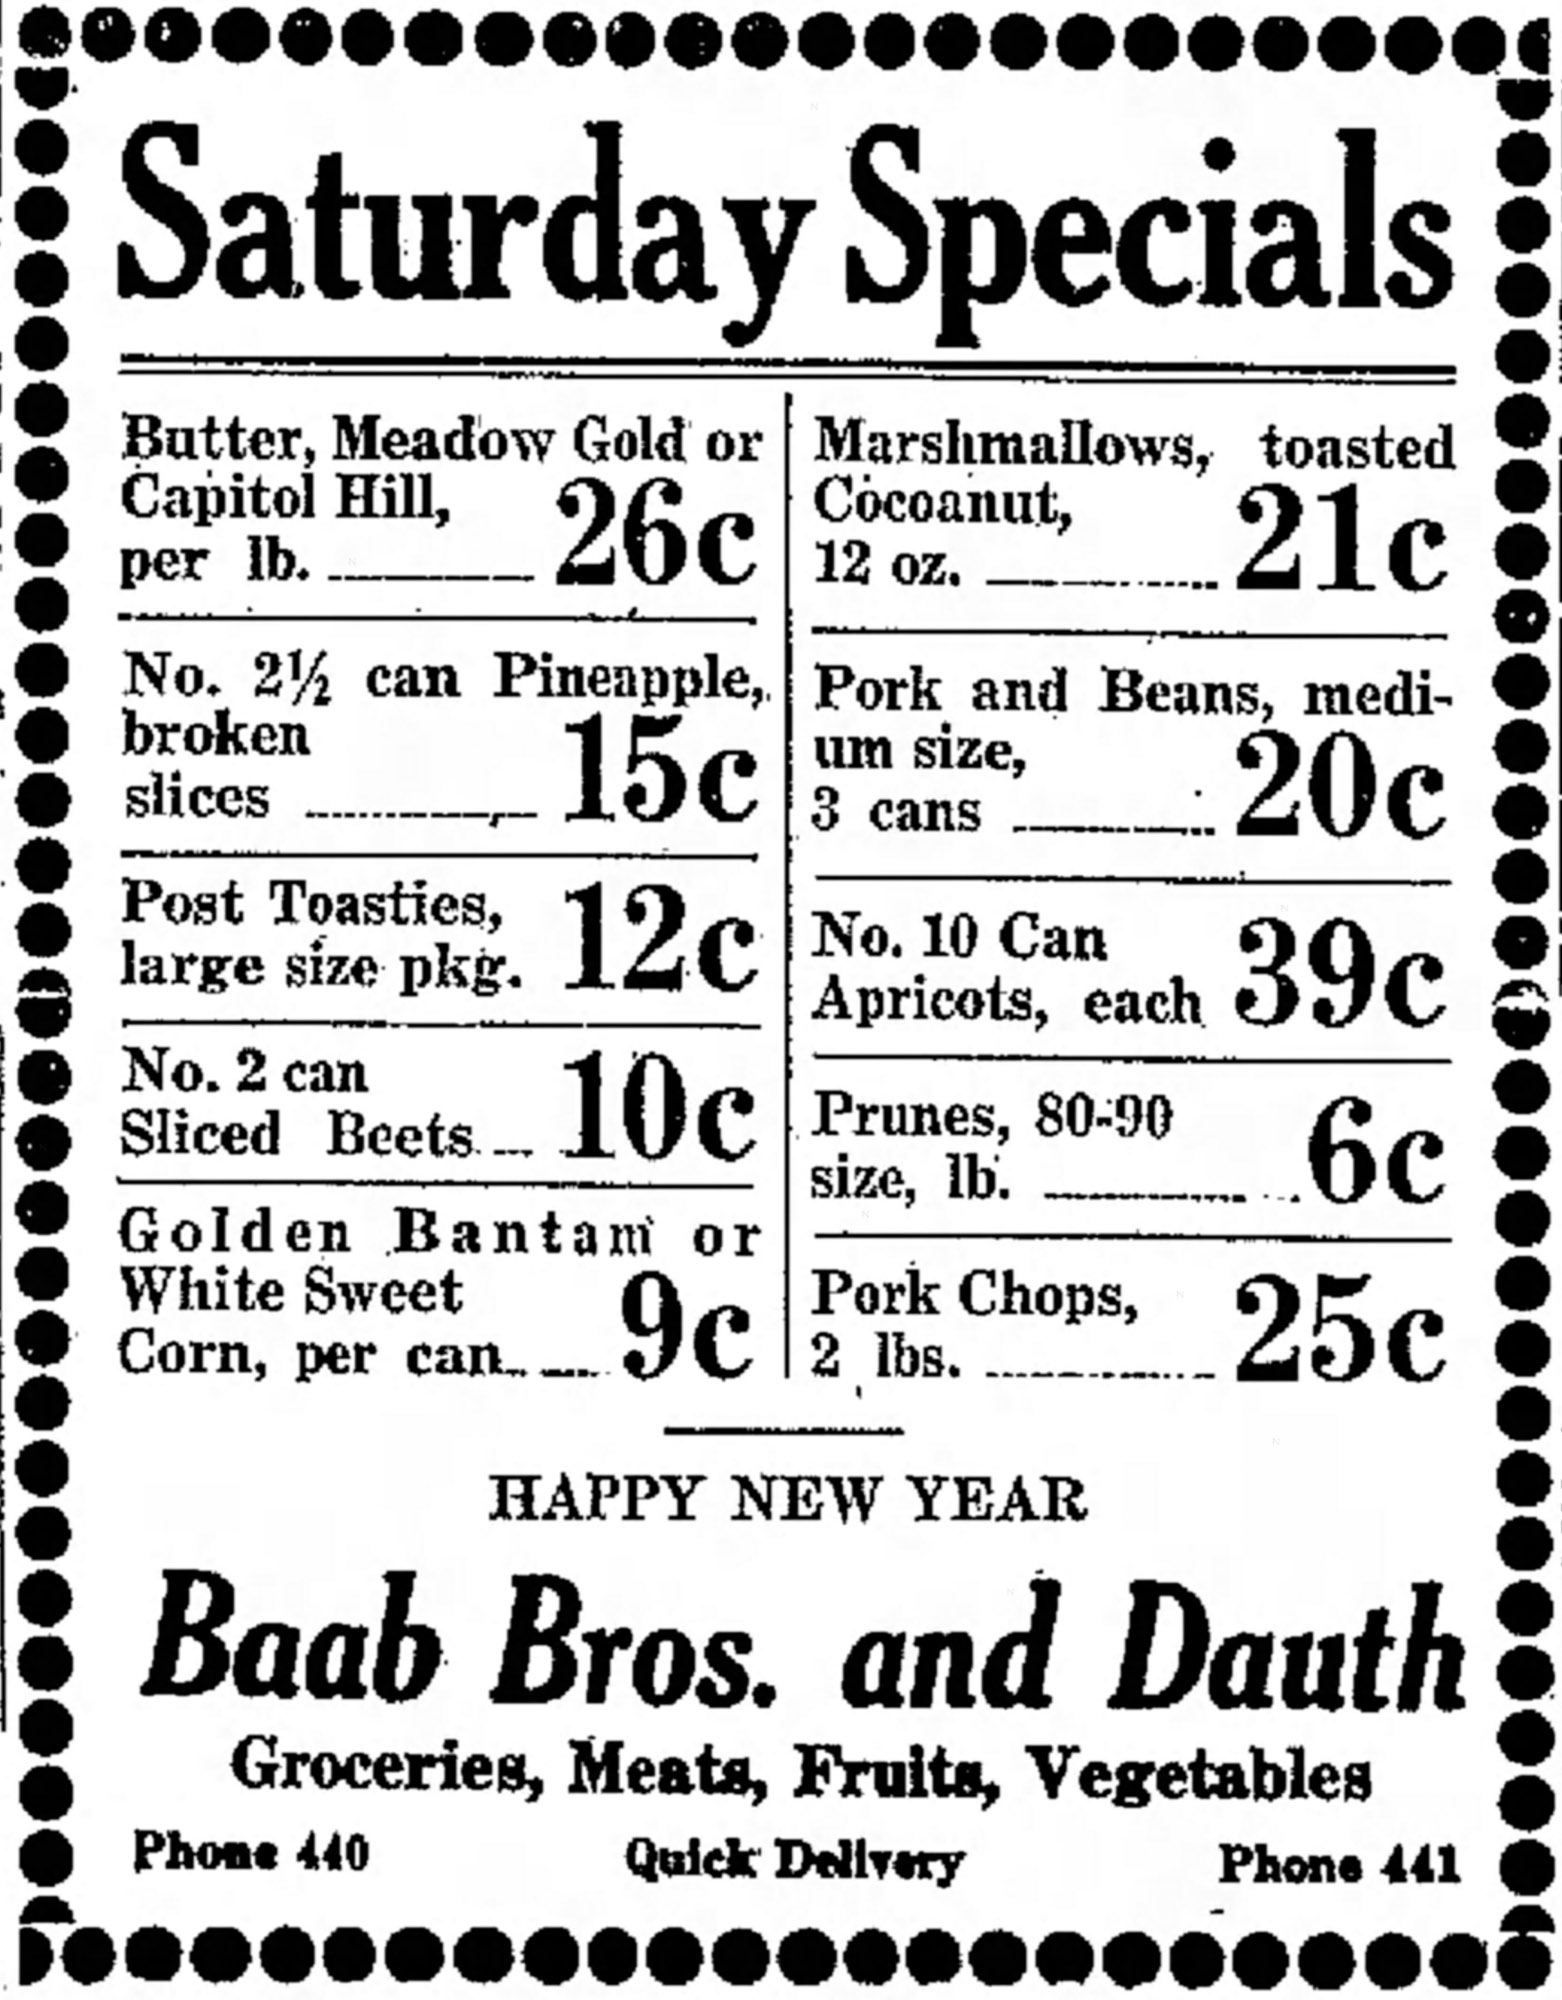 Dauth Family Archive - 1932-01-01 - Greeley Daily Tribune - Baab Bros and Dauth Advertisement